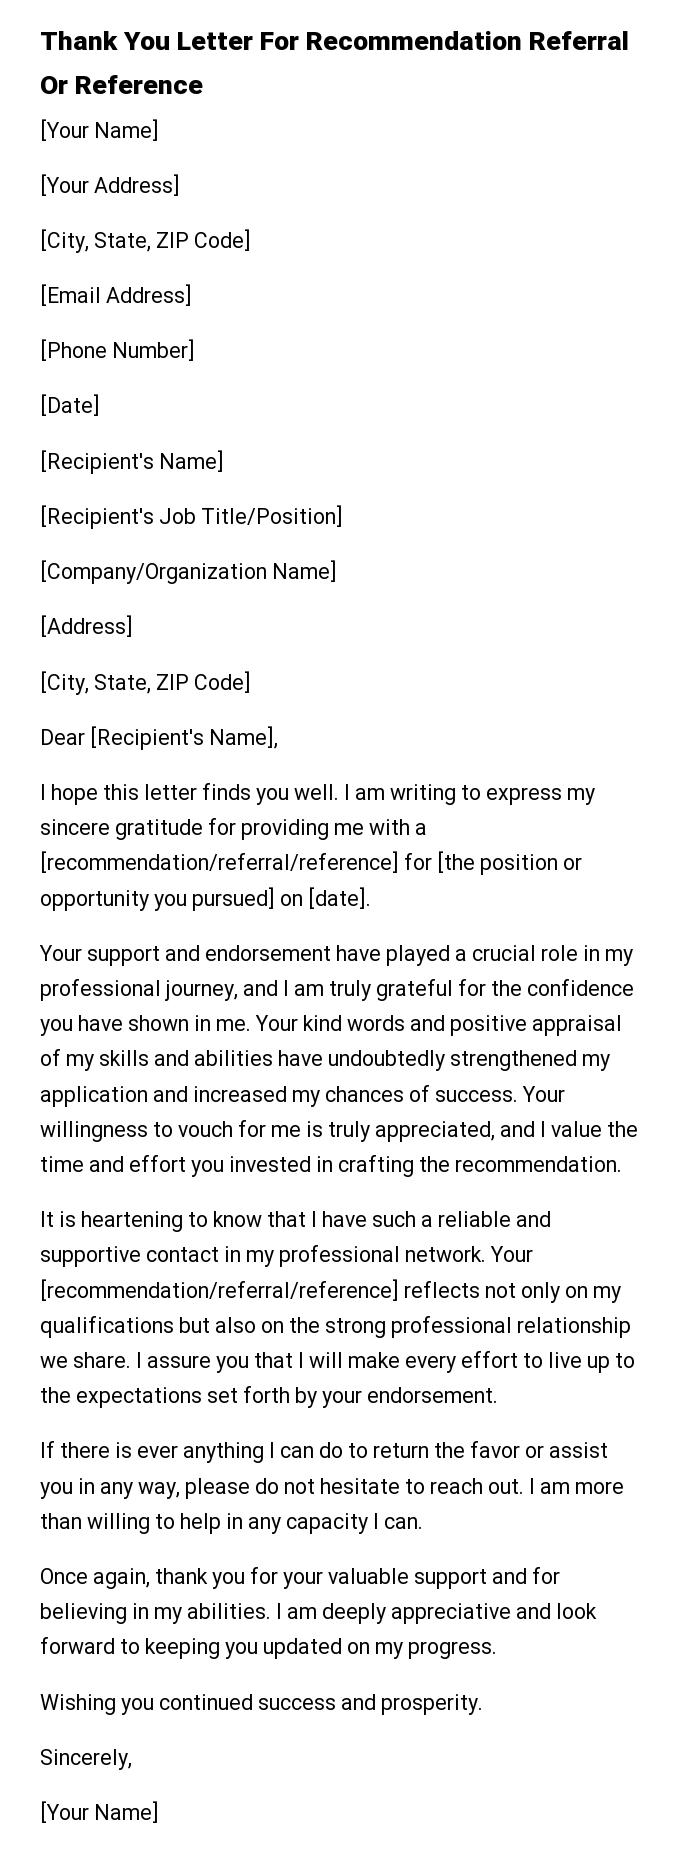 Thank You Letter For Recommendation Referral Or Reference